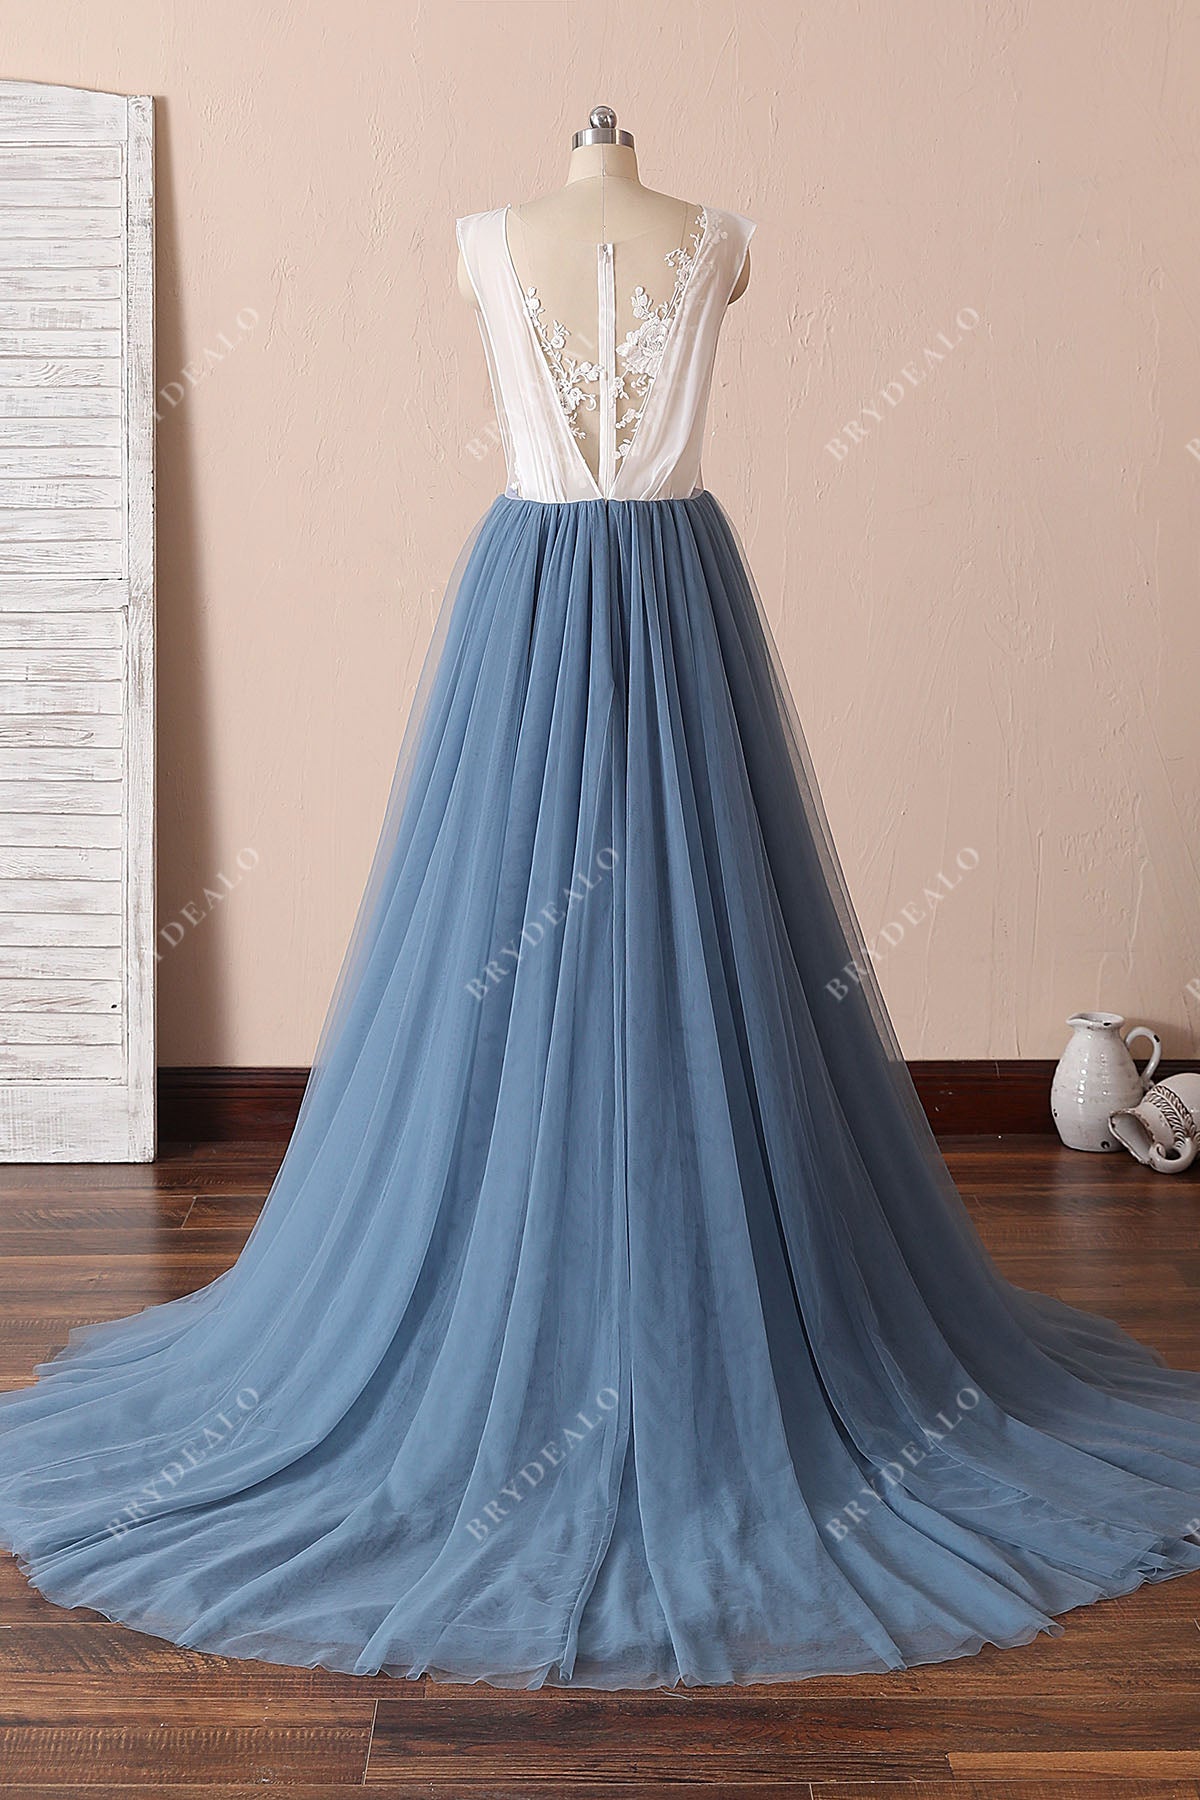 illusion back classy two-tone illusion ivory lace dusty blue tulle dress